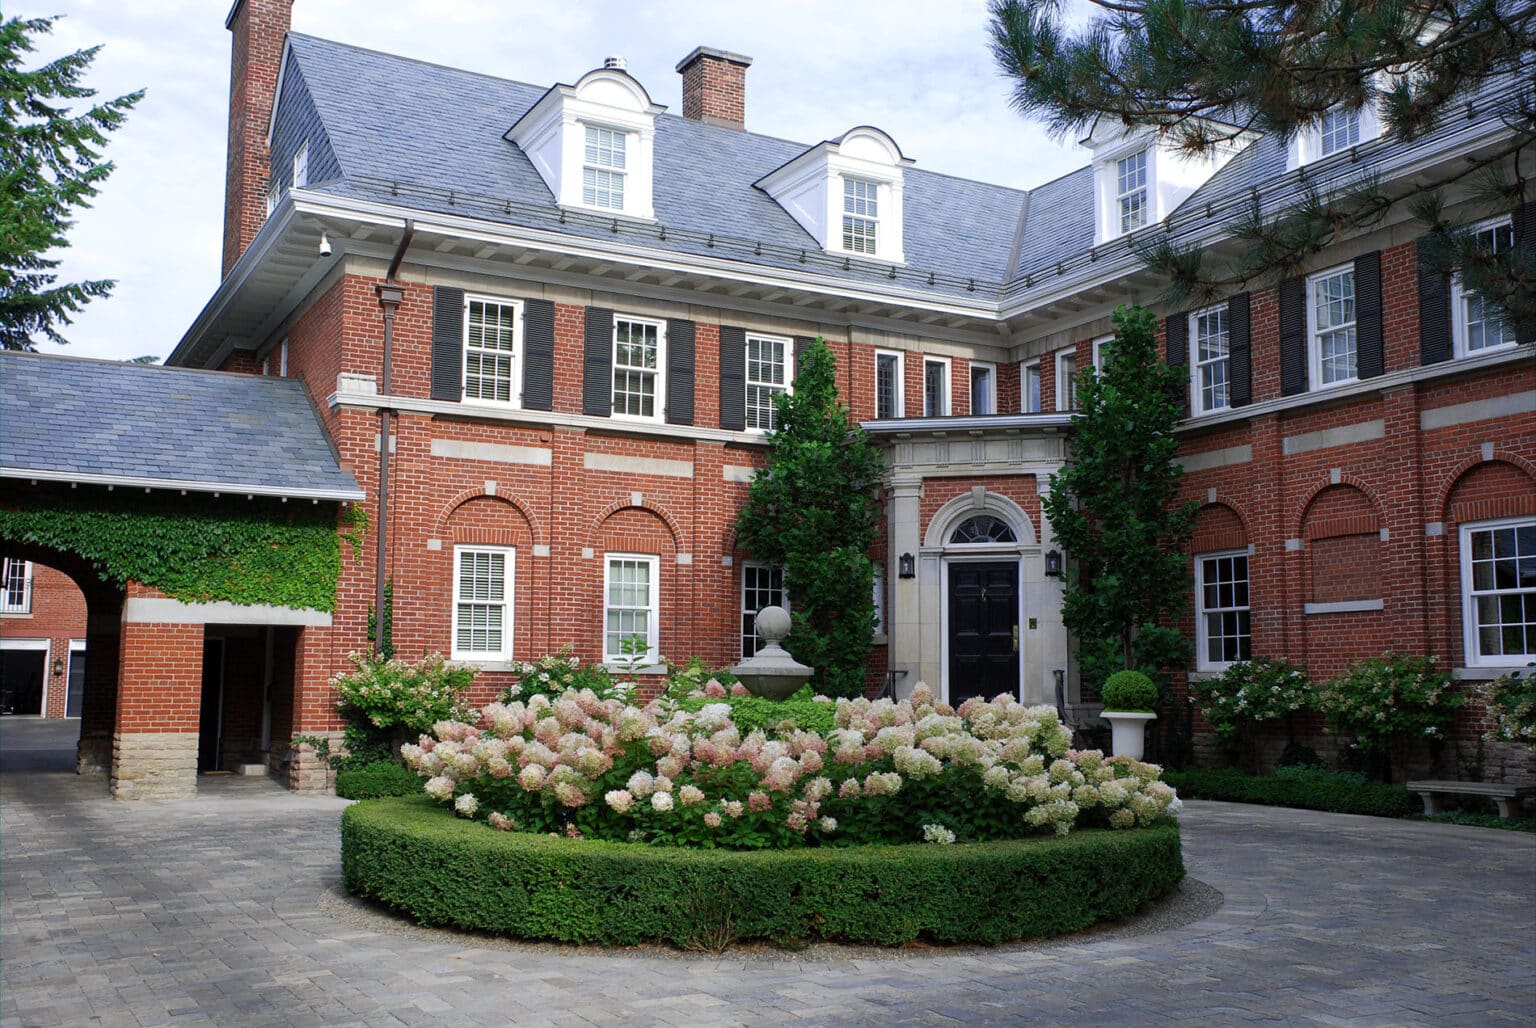 Large house with salte roof, hydrangea in circular driveway.